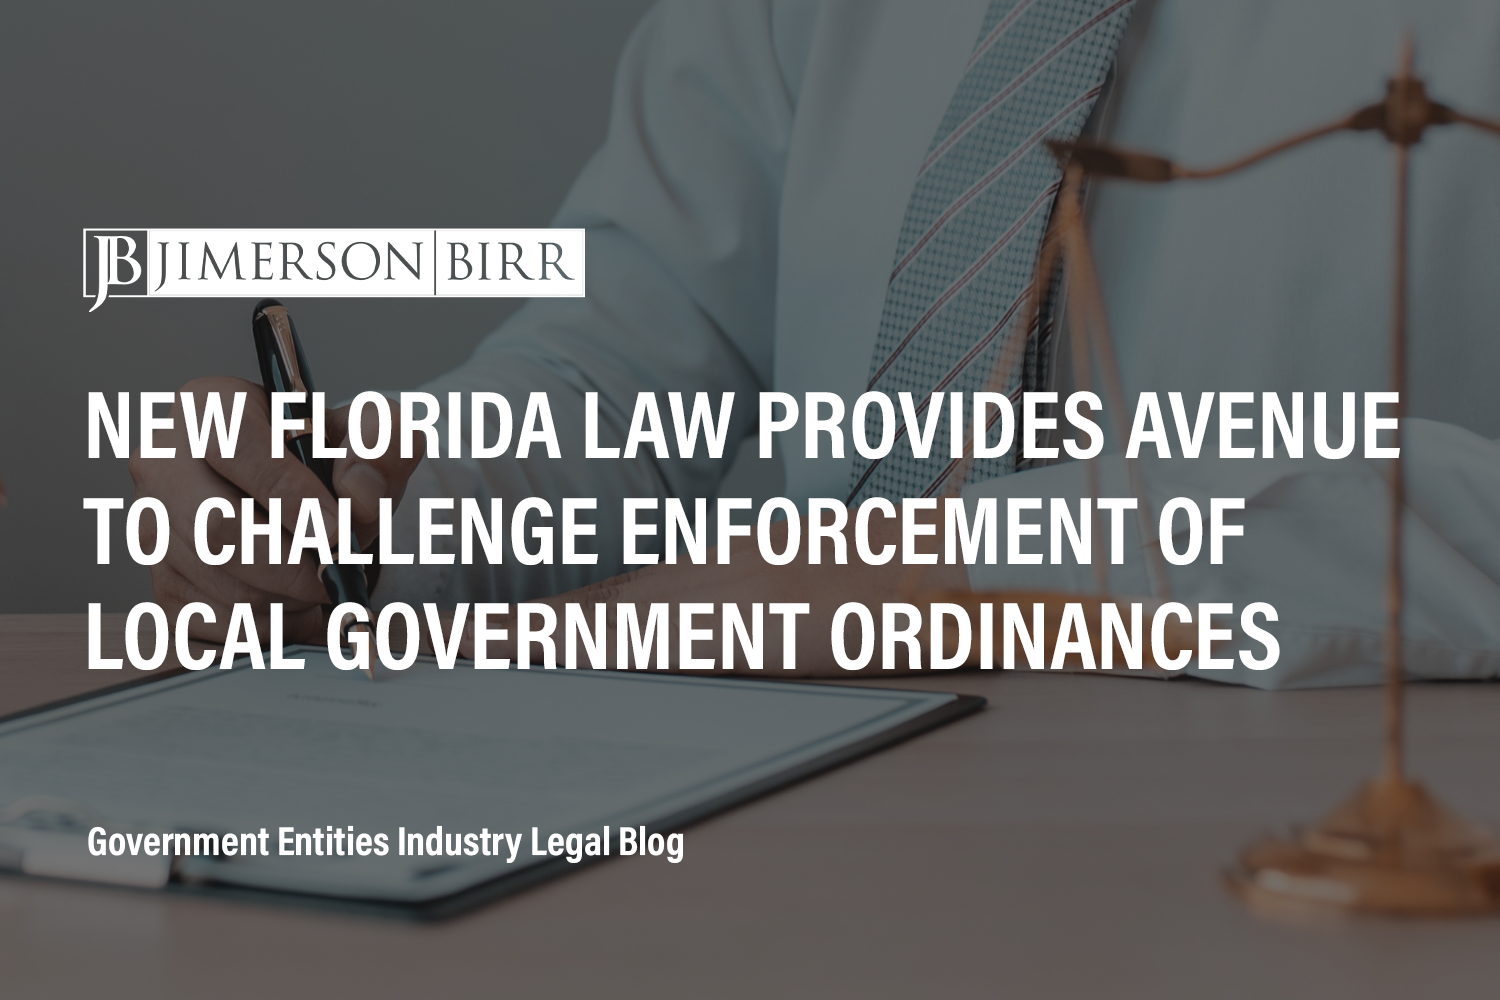 New Florida Law Provides Avenue to Challenge Enforcement of Local Government Ordinances